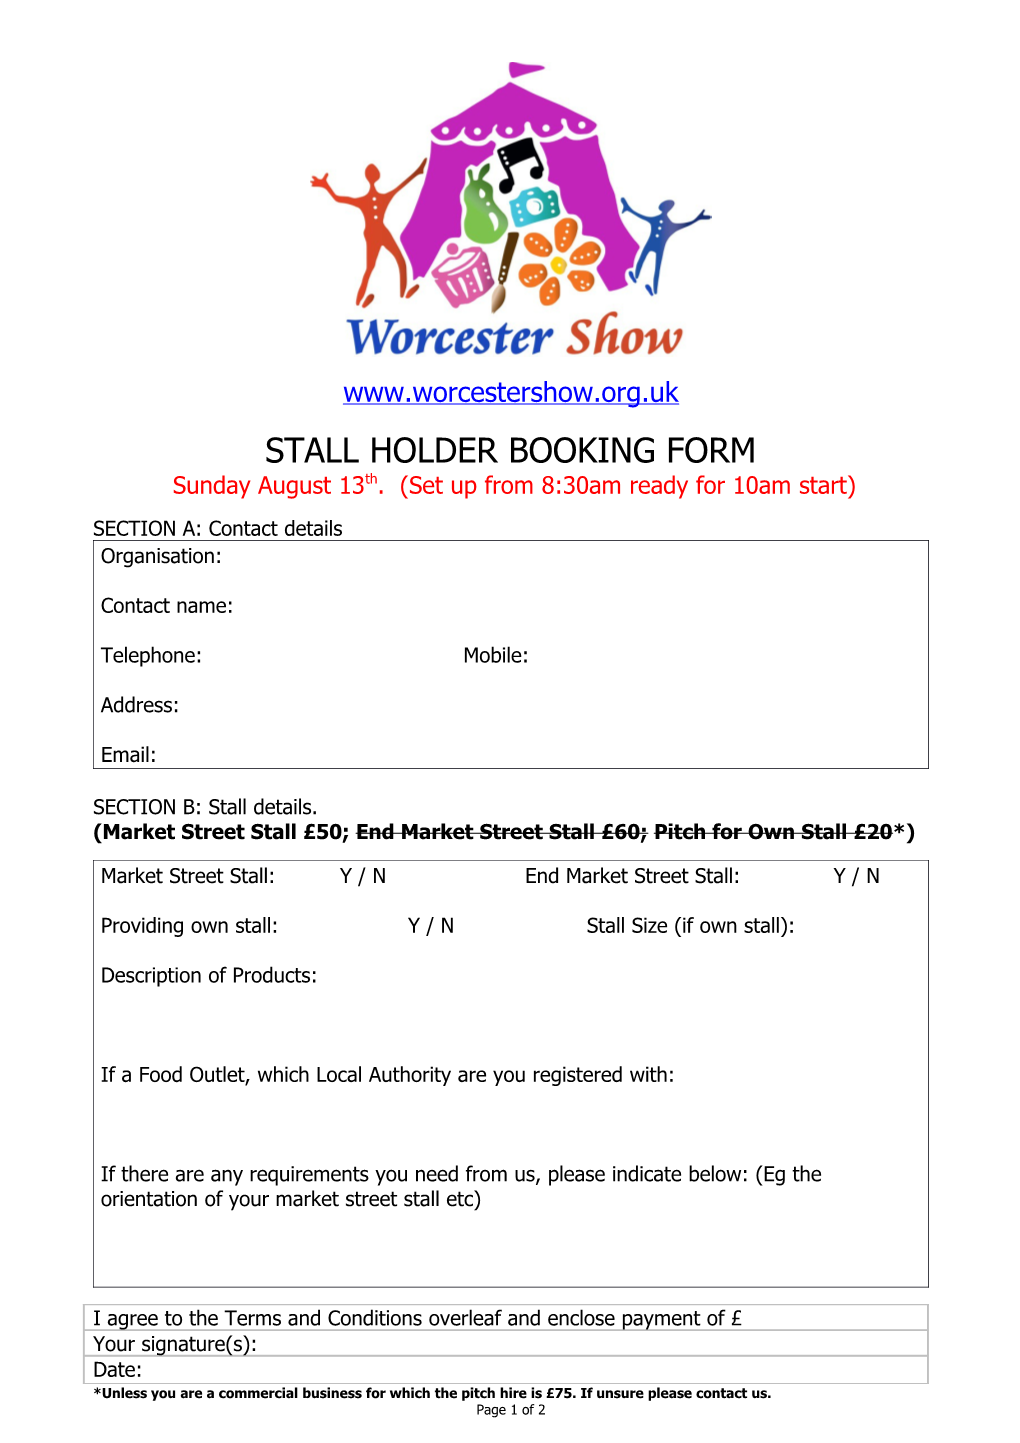 Stall Holder Booking Form